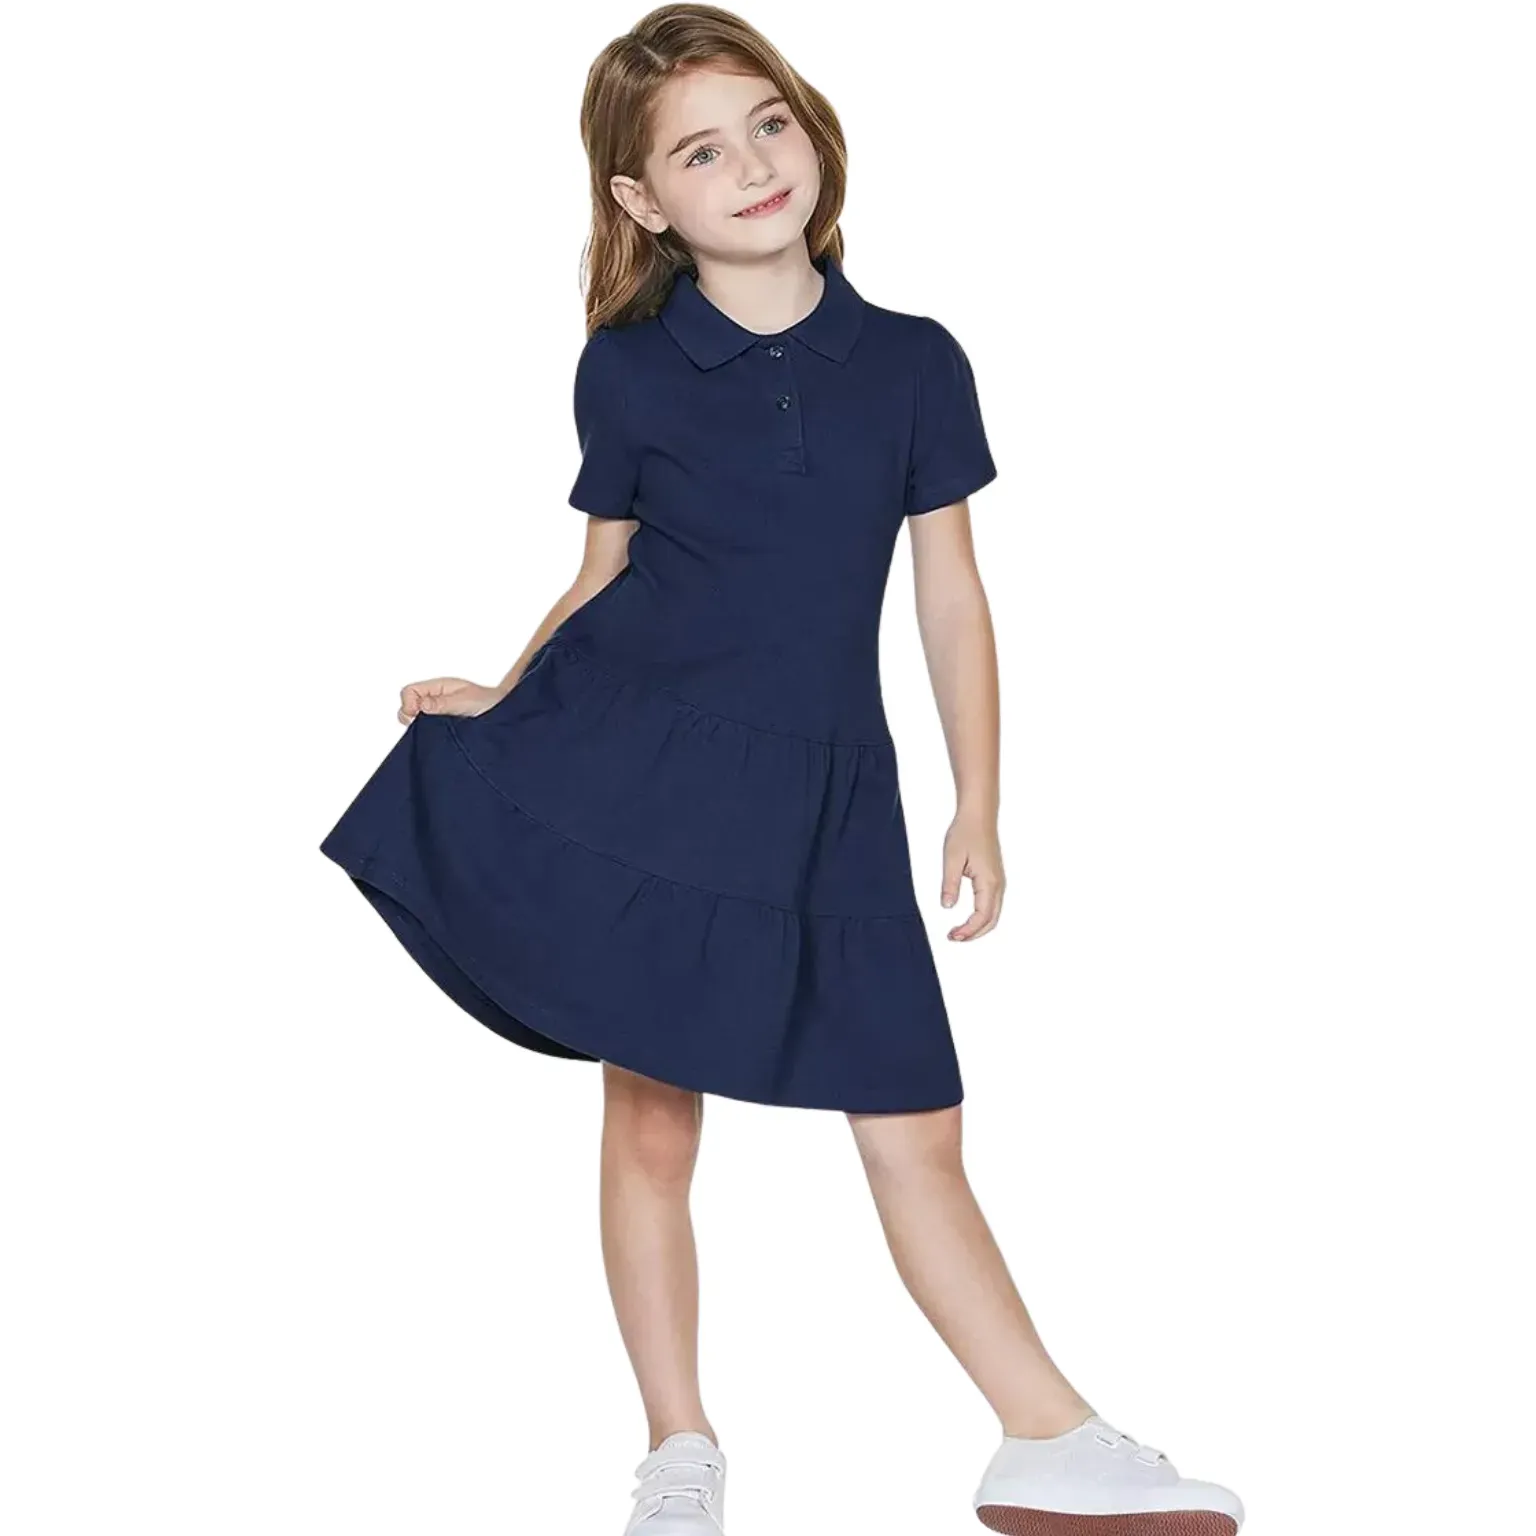 Short Sleeve Dress manufacturing with trendy design